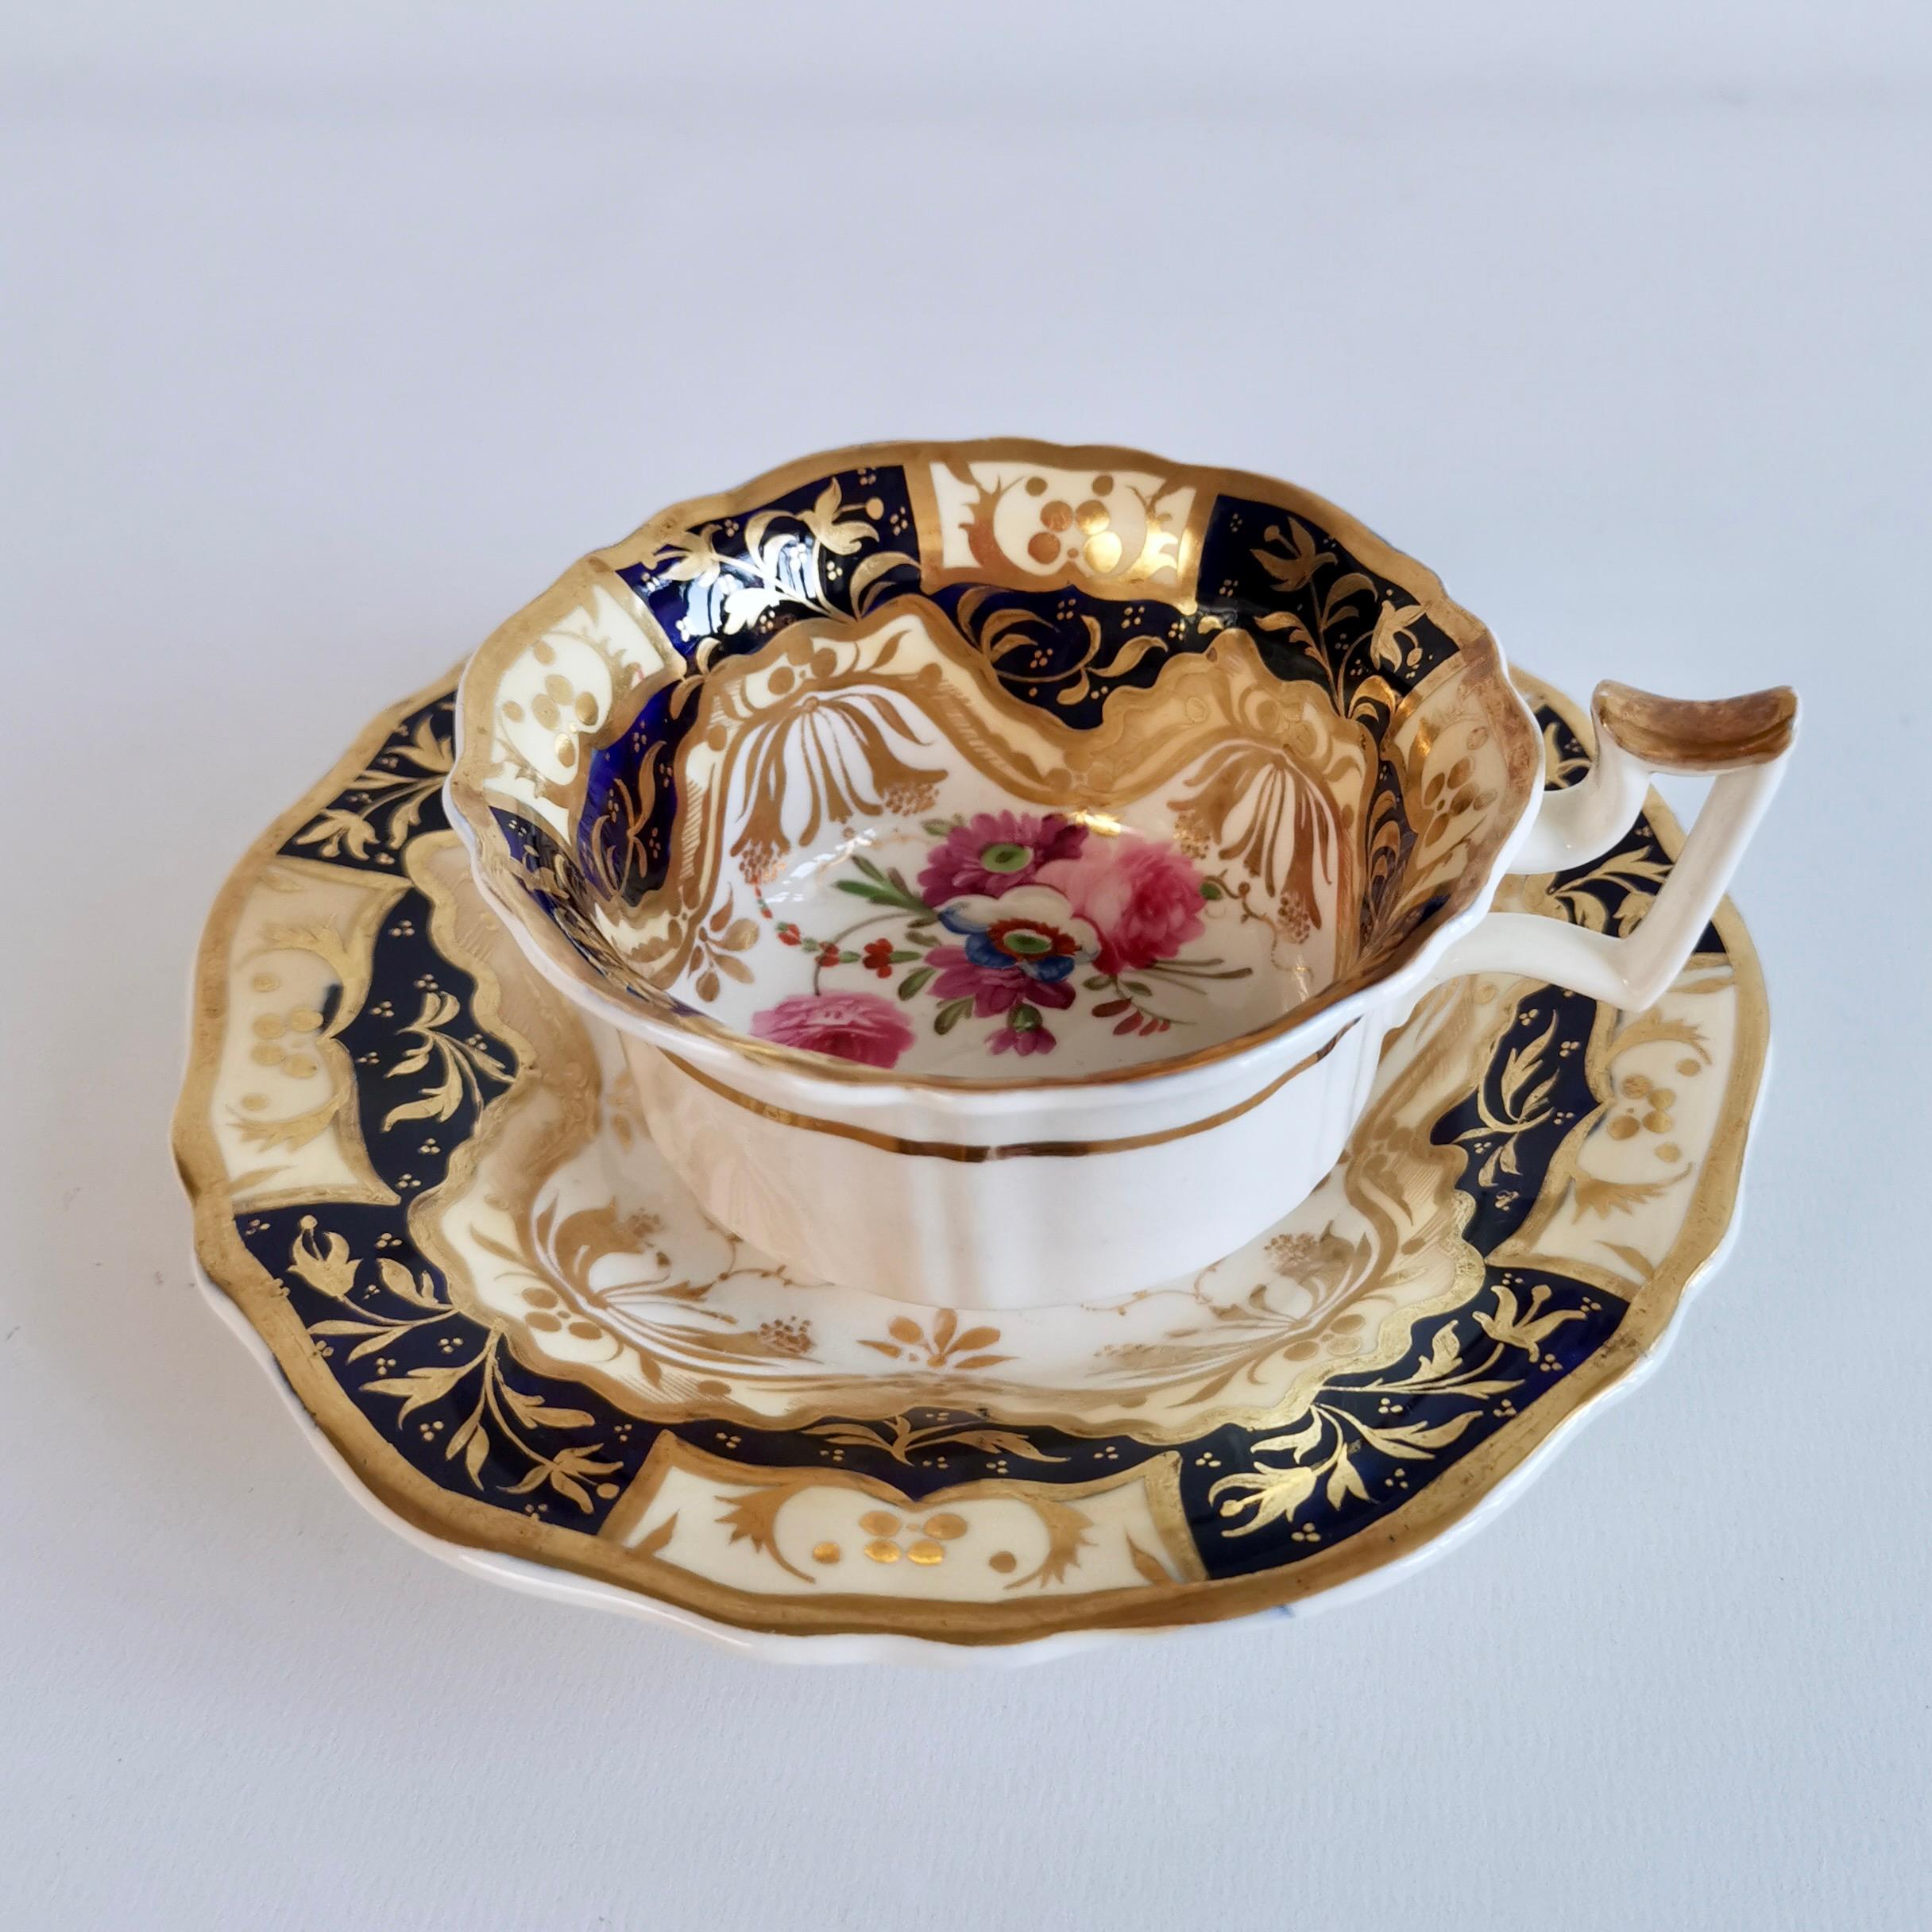 This is beautiful true trio consisting of a teacup, a coffee cup and a saucer, made by Yates in about 1825, which is known as the Regency period. The set was decorated with the famous pattern 1165, which was a pattern done by a factory often called